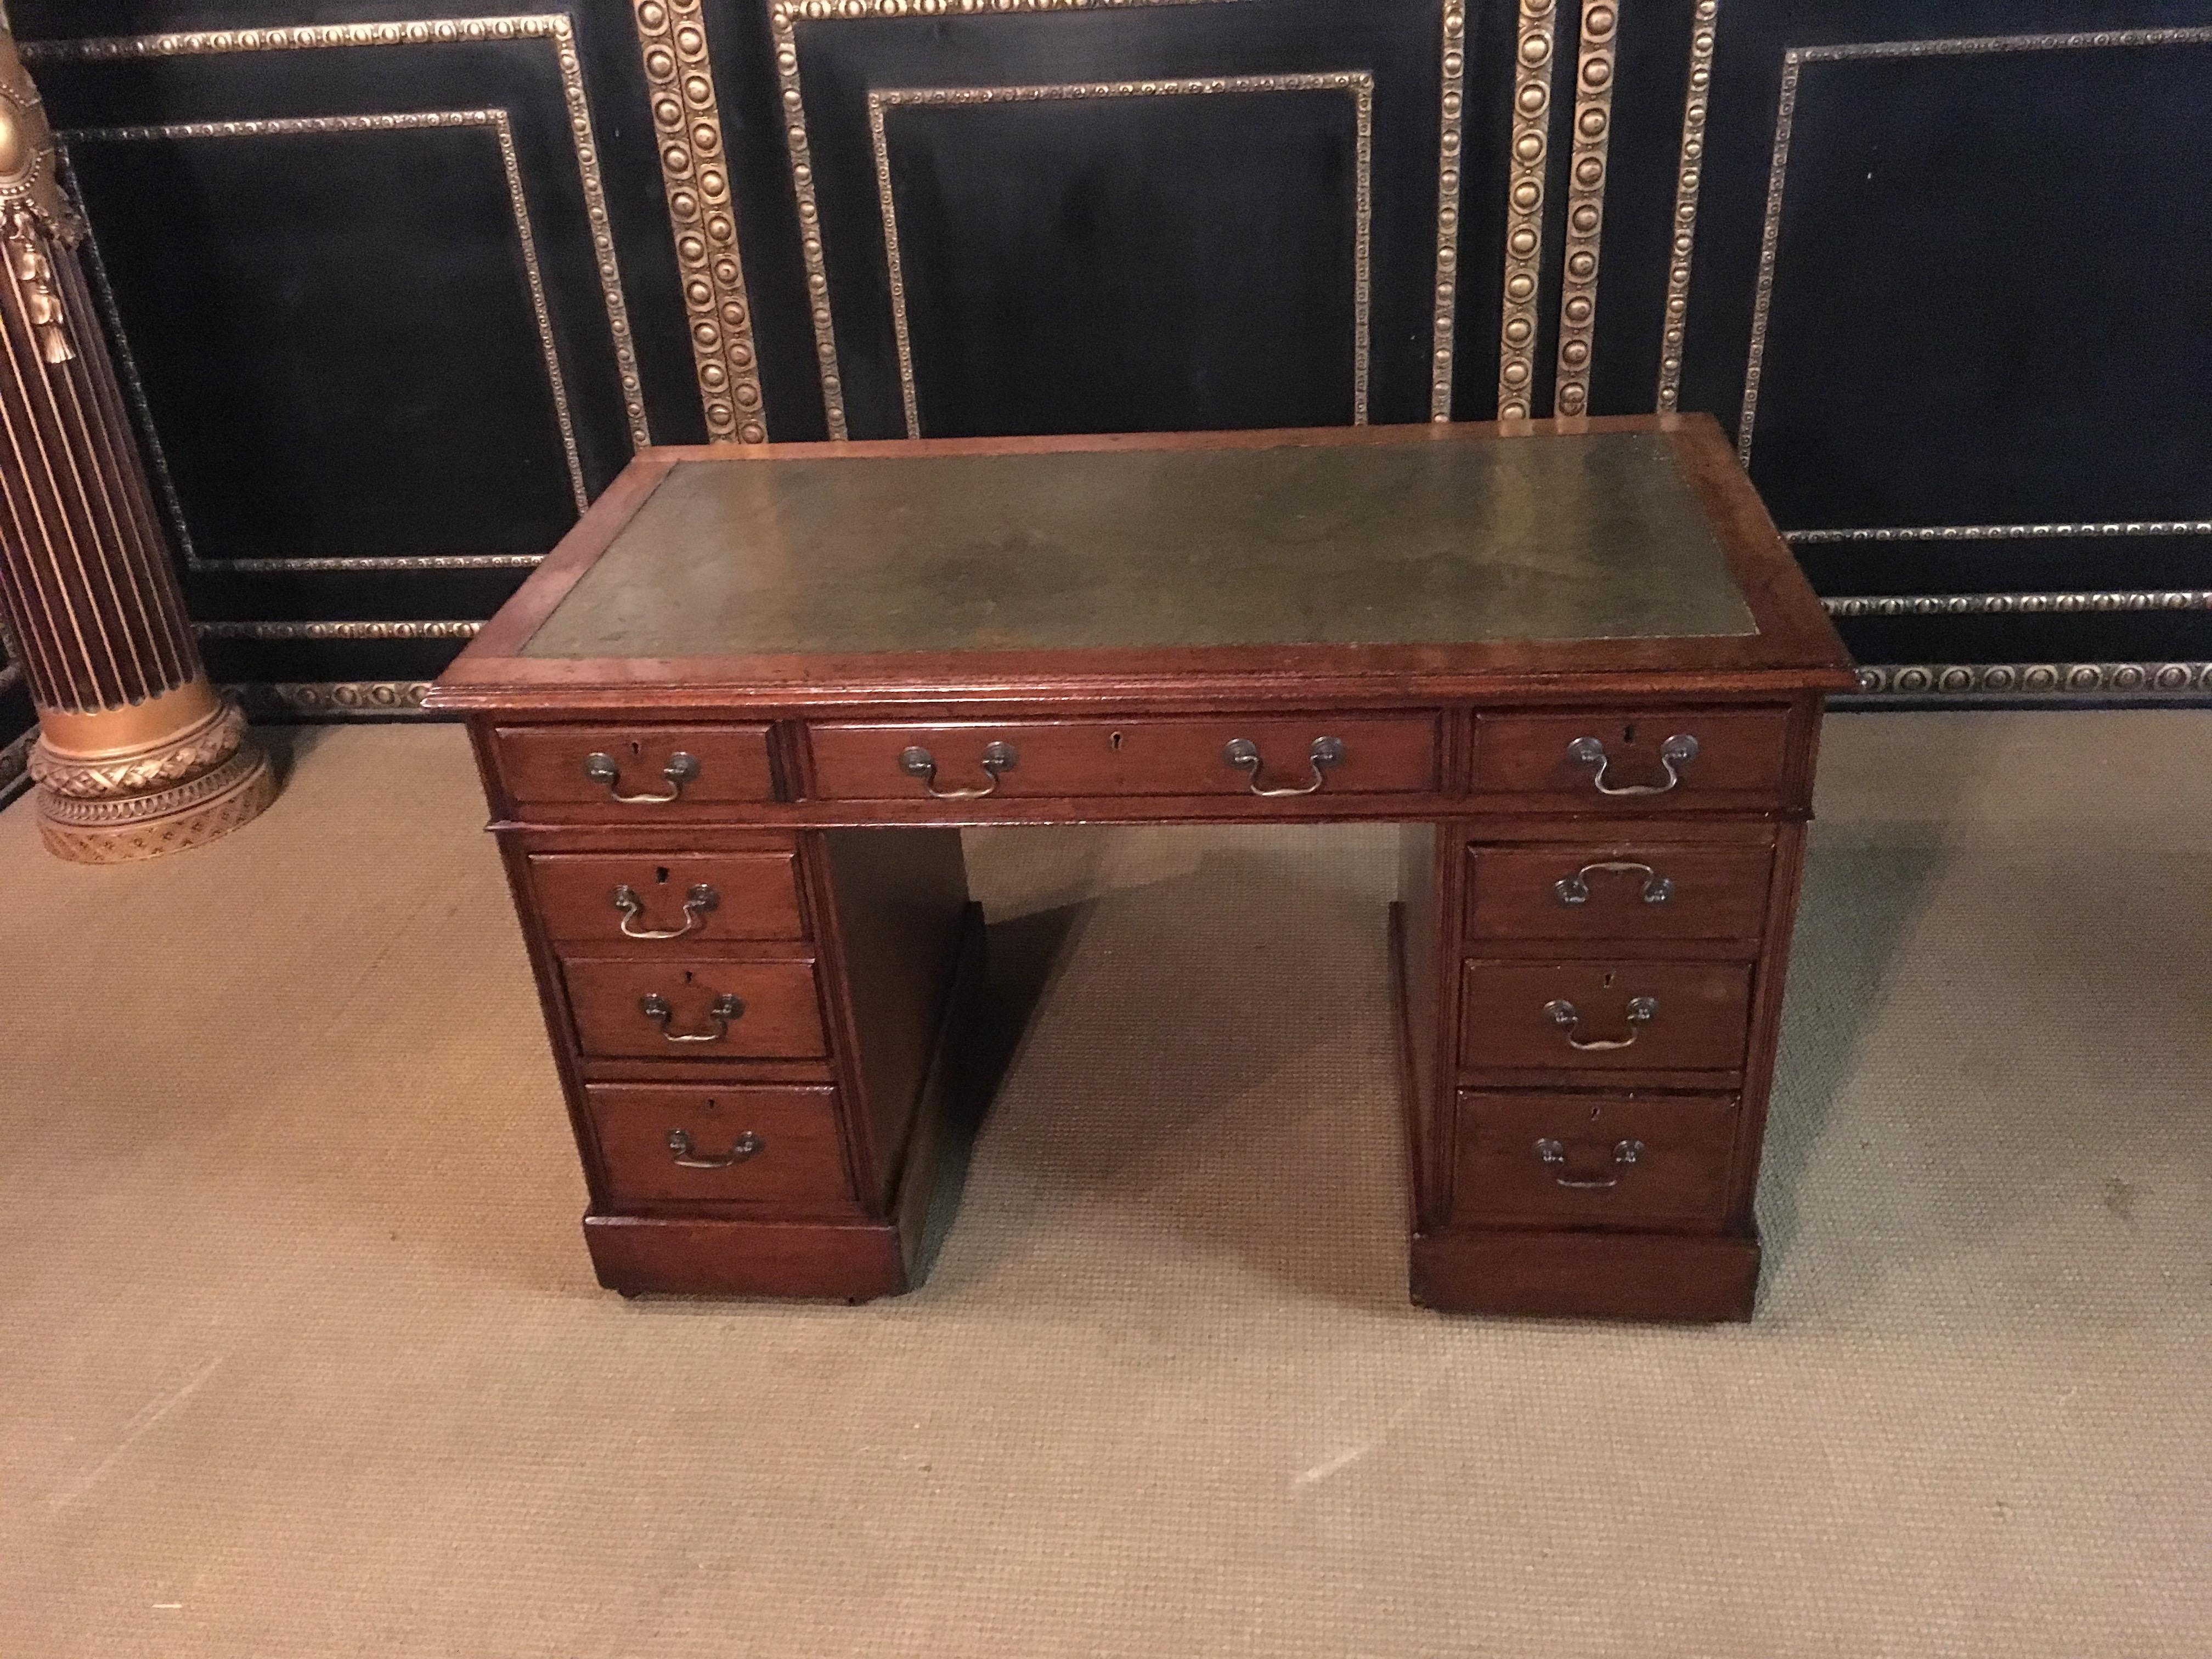 Original English desk with leather plate.

The desk consists of 3 parts, plate and right and left containers.
The desk still has the original metal feet.
Mahogany veneer.

Top with a nice leather plate with gold decoration, real gold leaf.